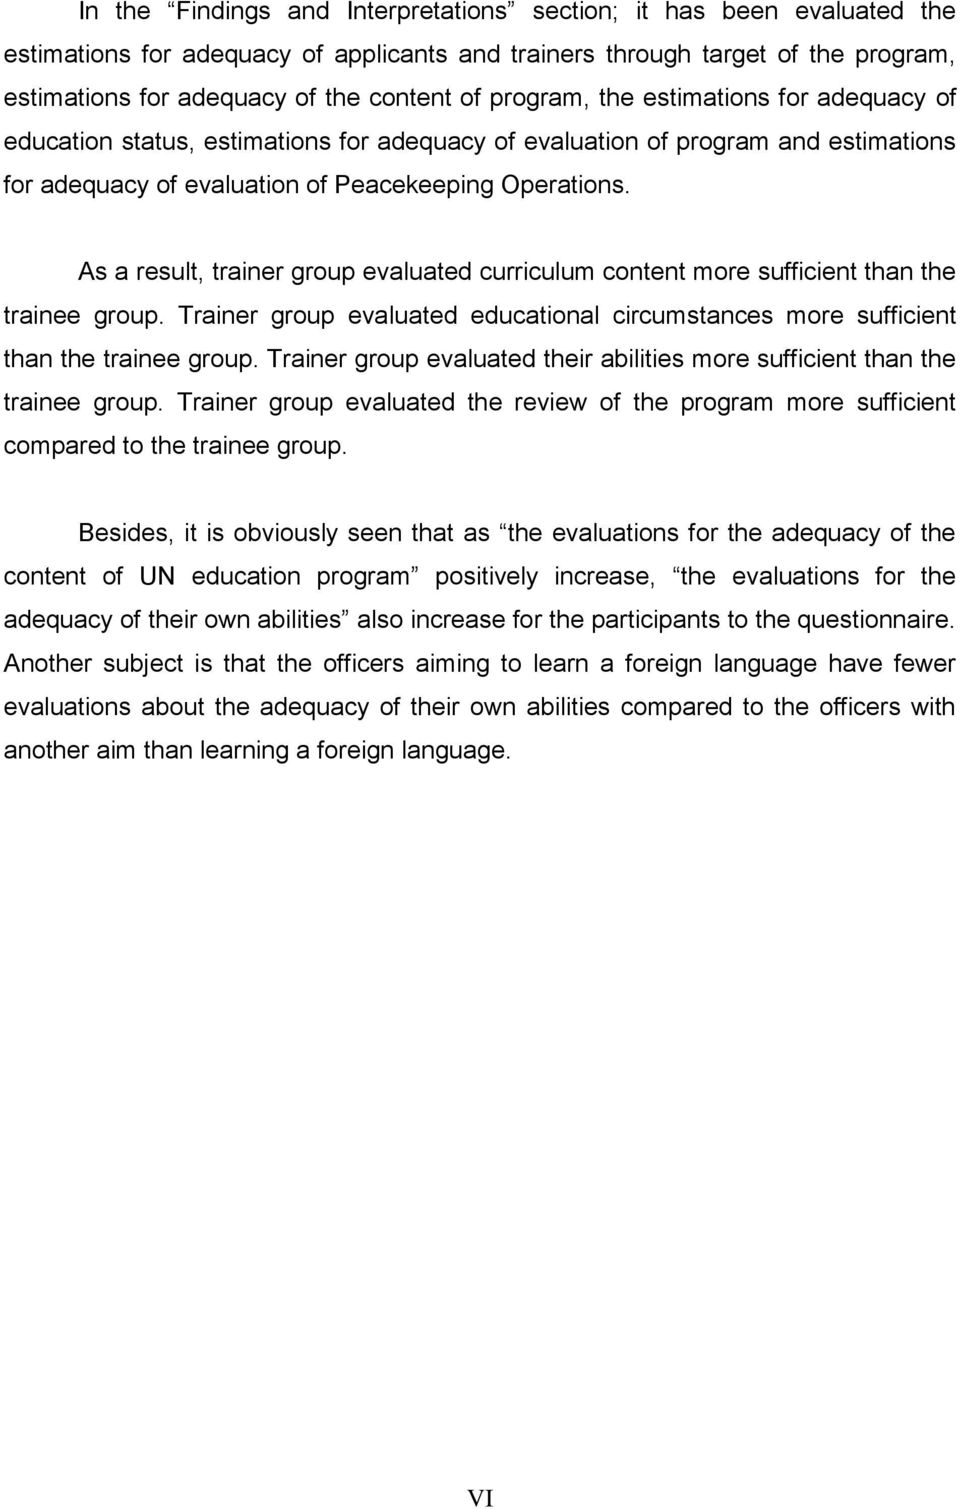 As a result, trainer group evaluated curriculum content more sufficient than the trainee group. Trainer group evaluated educational circumstances more sufficient than the trainee group.